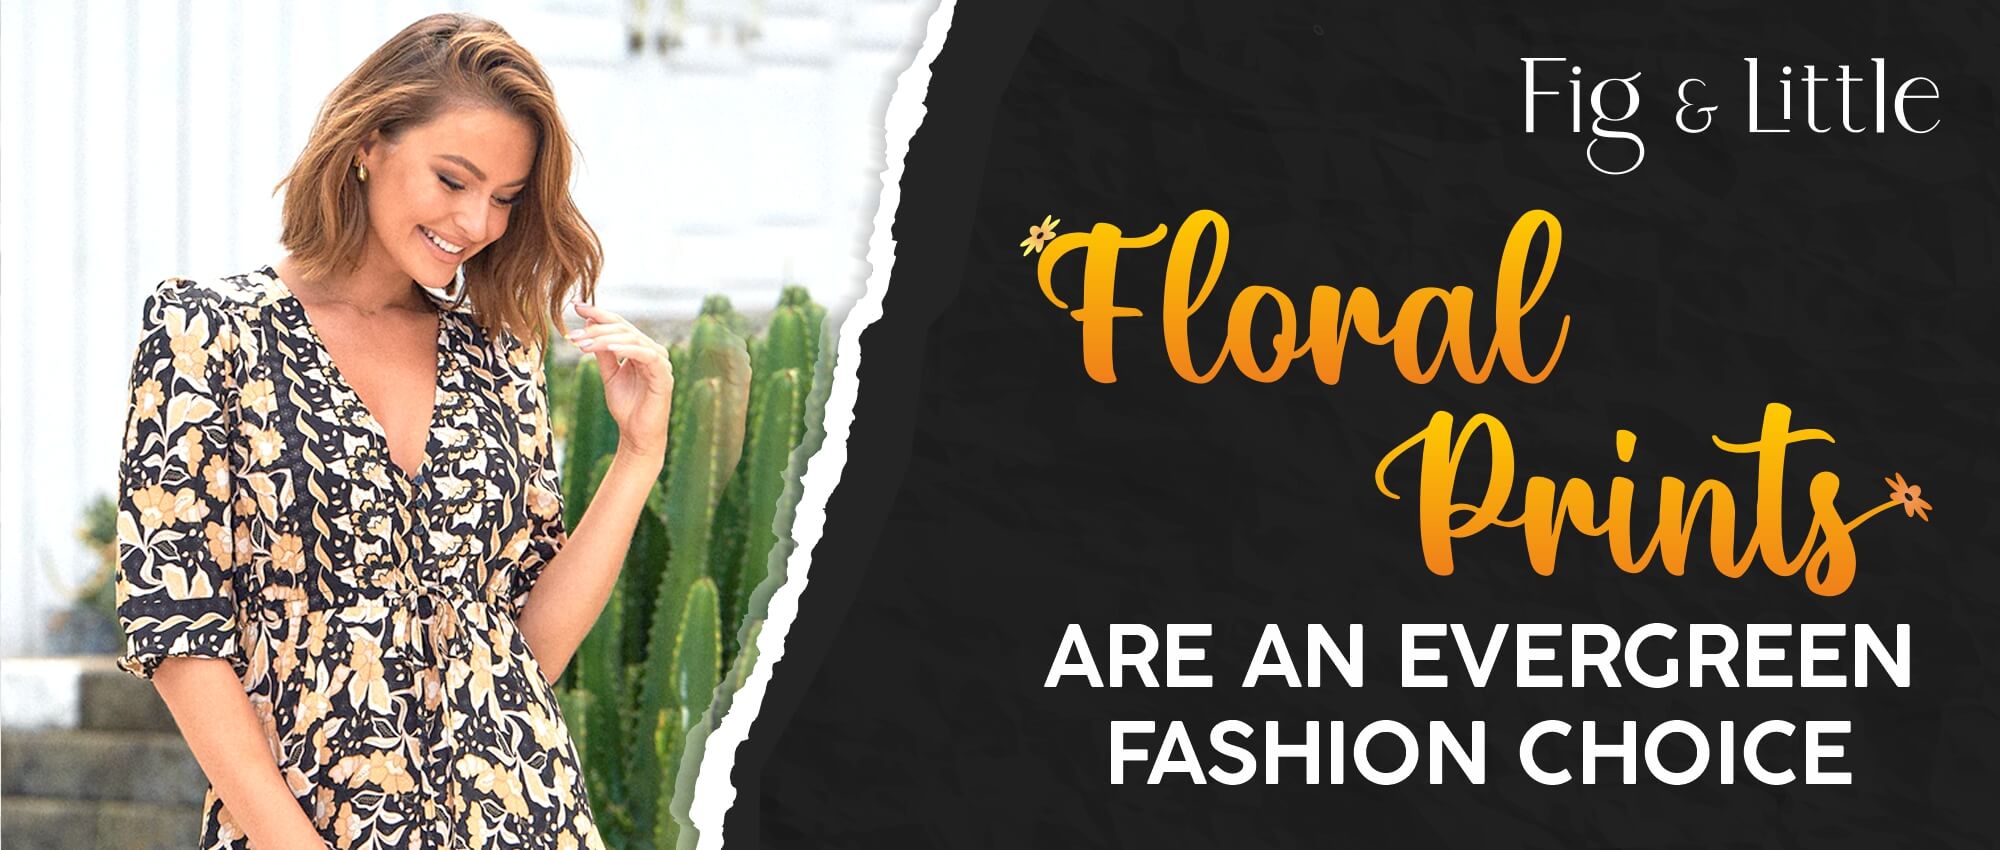 FLORAL PRINTS ARE AN EVERGREEN FASHION CHOICE